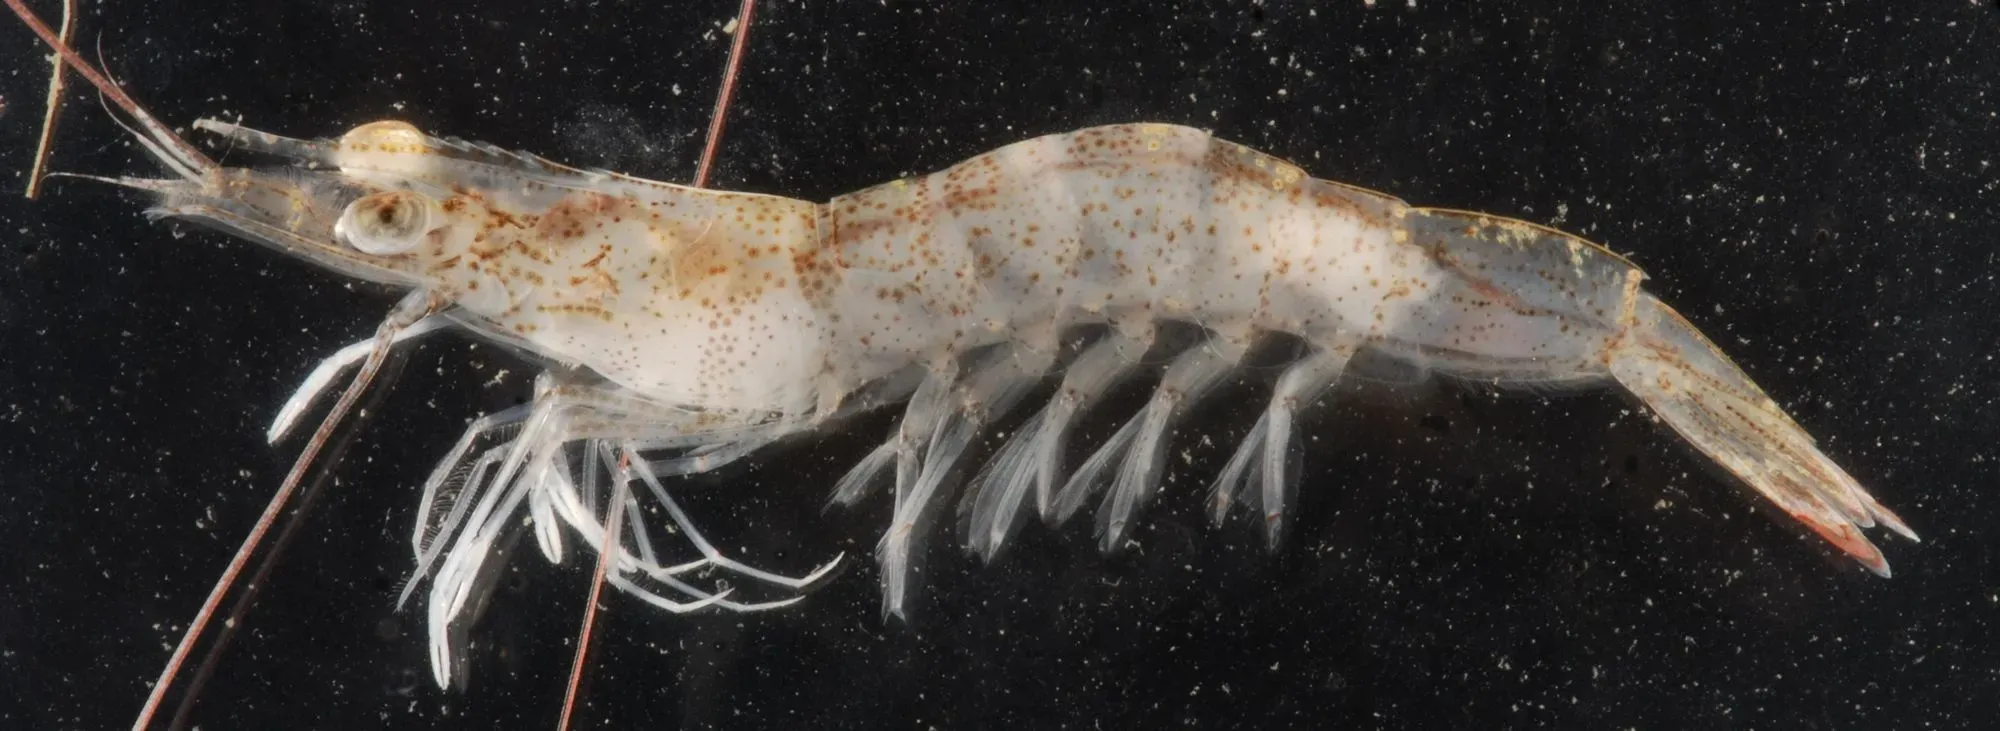 White shrimp are found in the Atlantic ocean near New York and Florida.